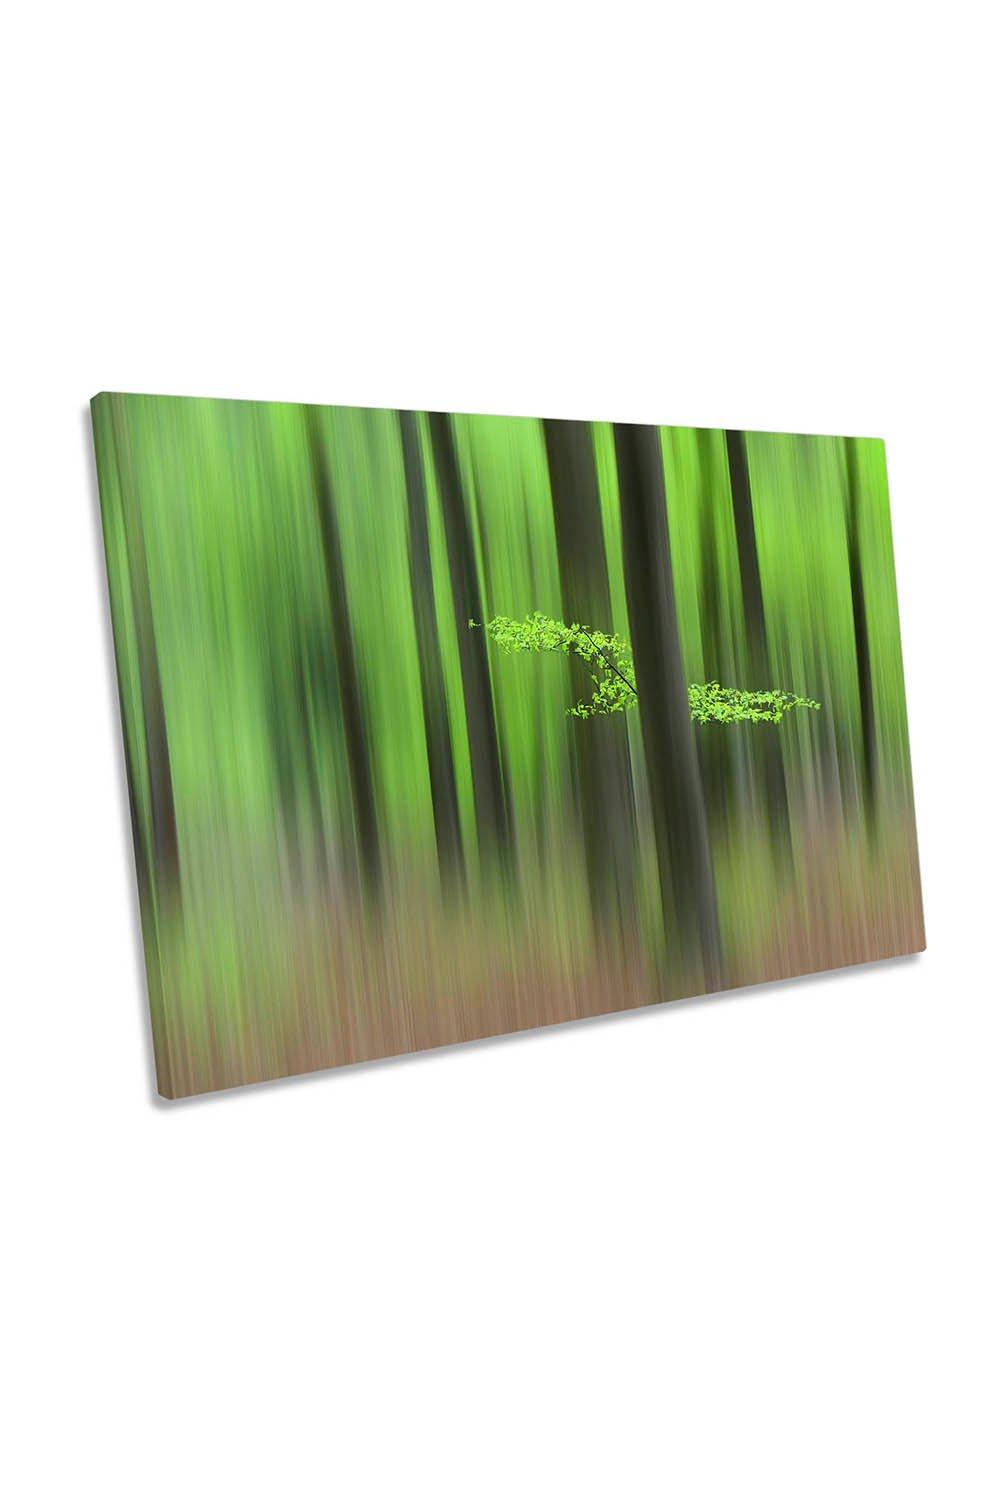 Spring Morning Forest Abstract Green Canvas Wall Art Picture Print